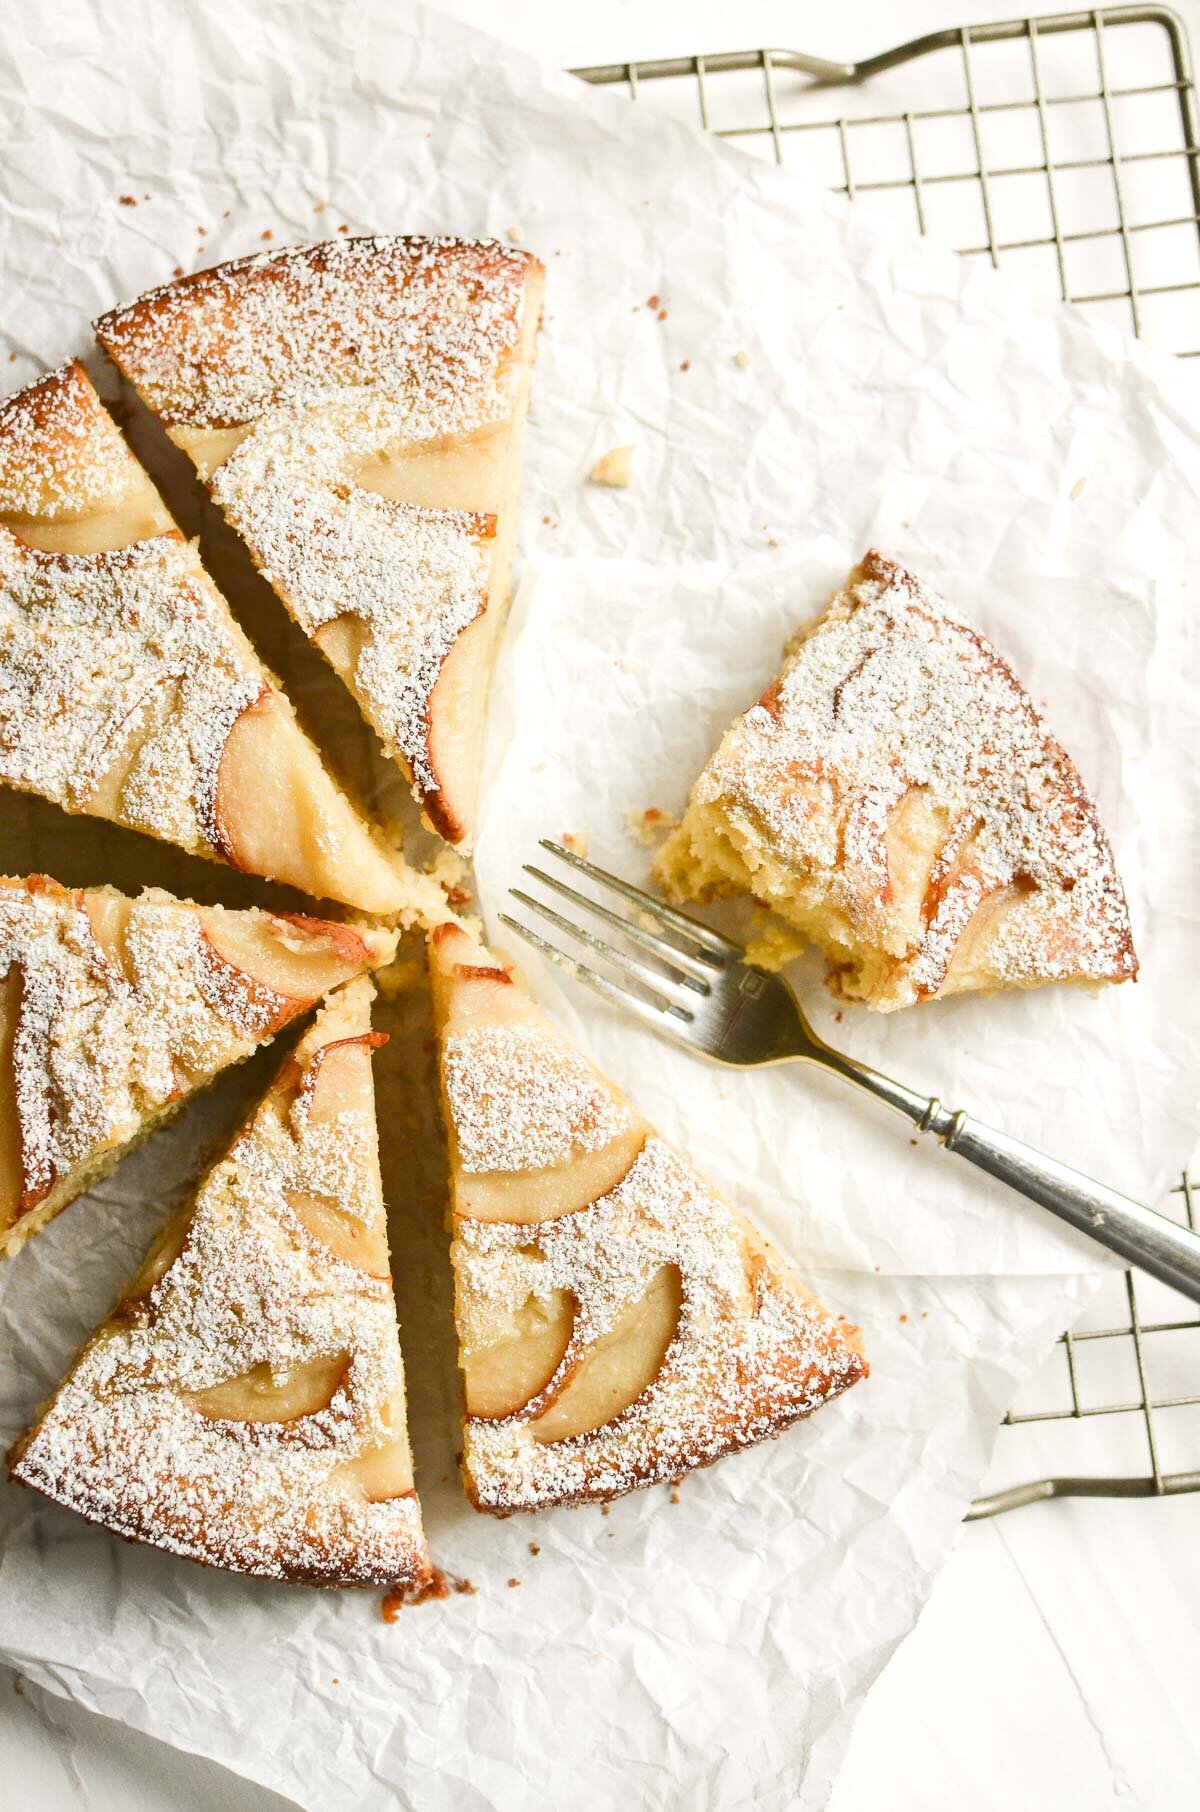 Fresh Ginger and Pear Cake